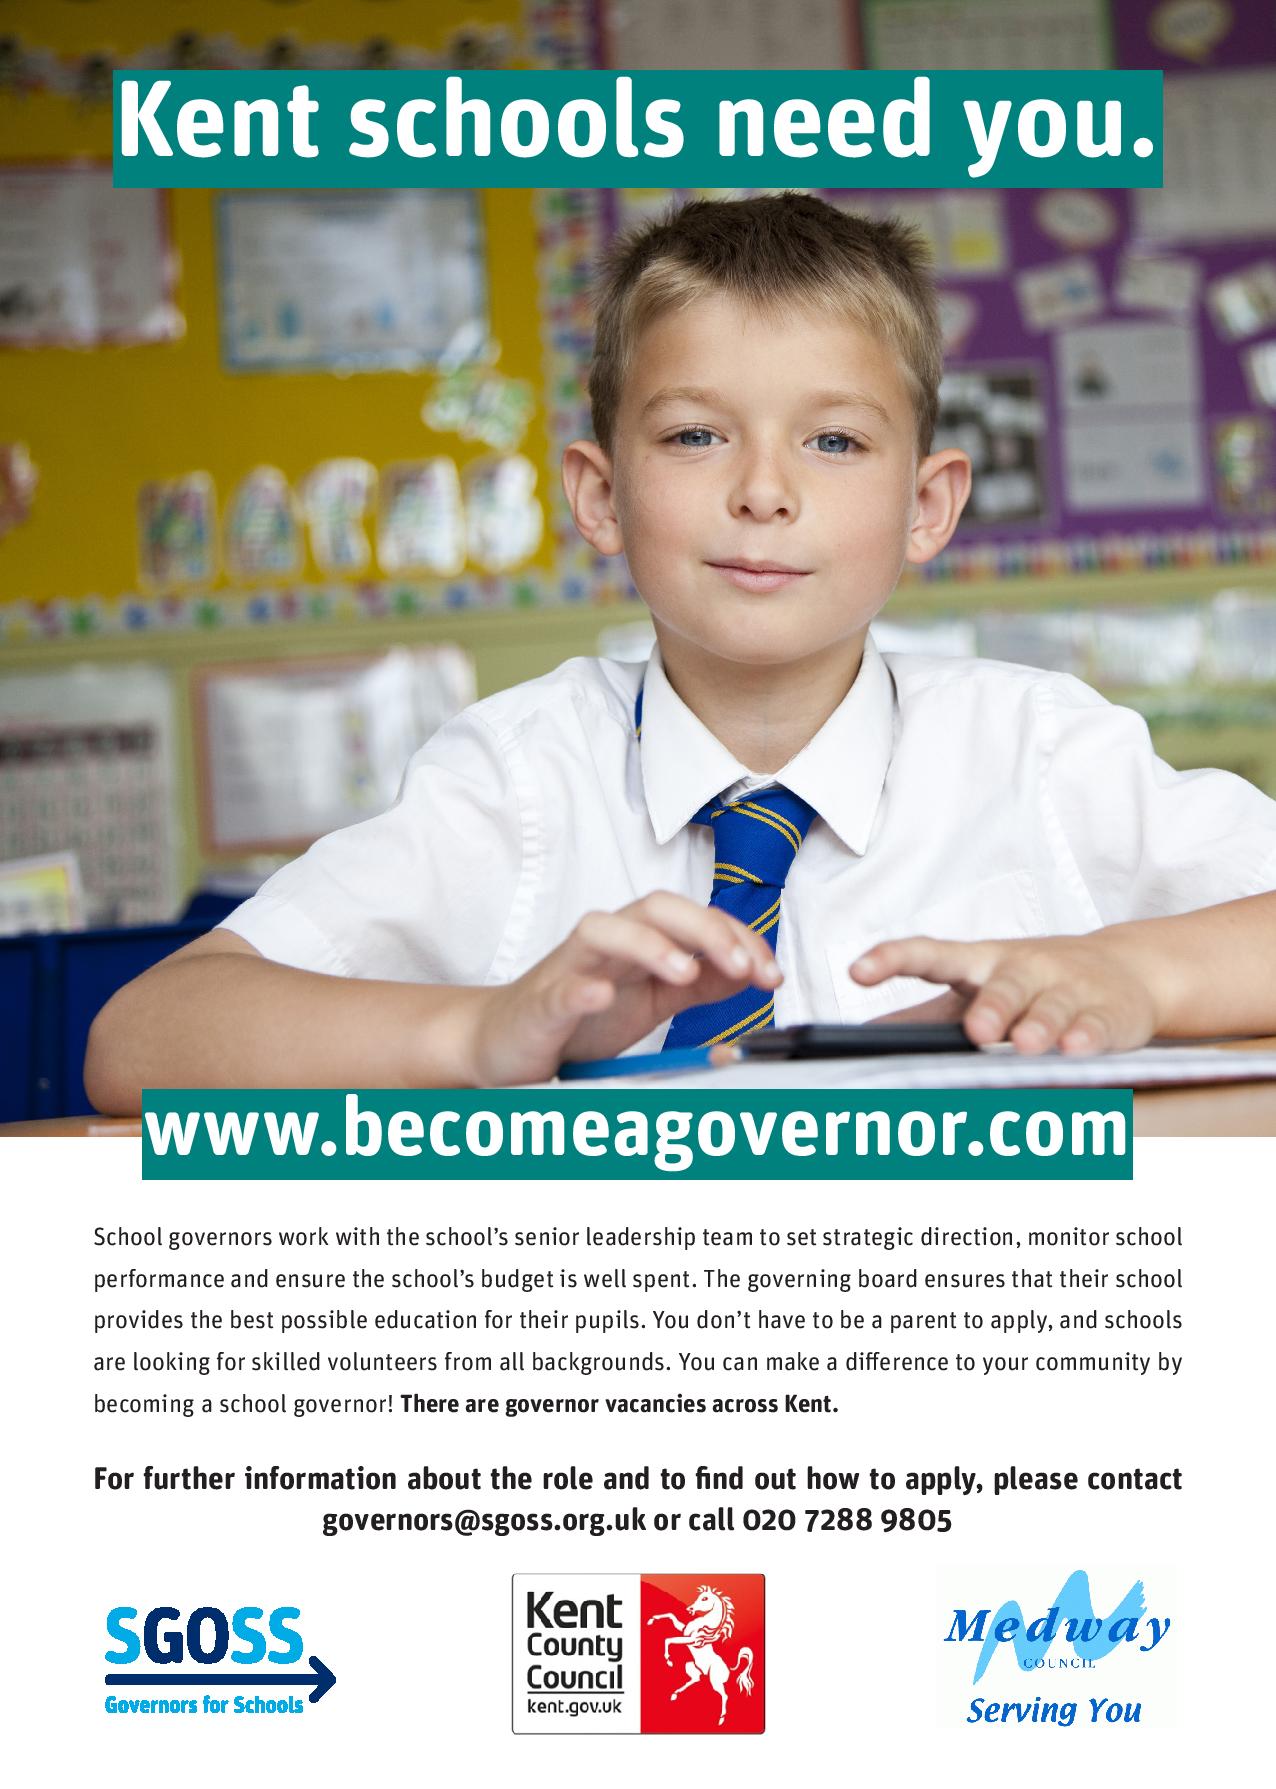 SGOSS - Governors for schools poster